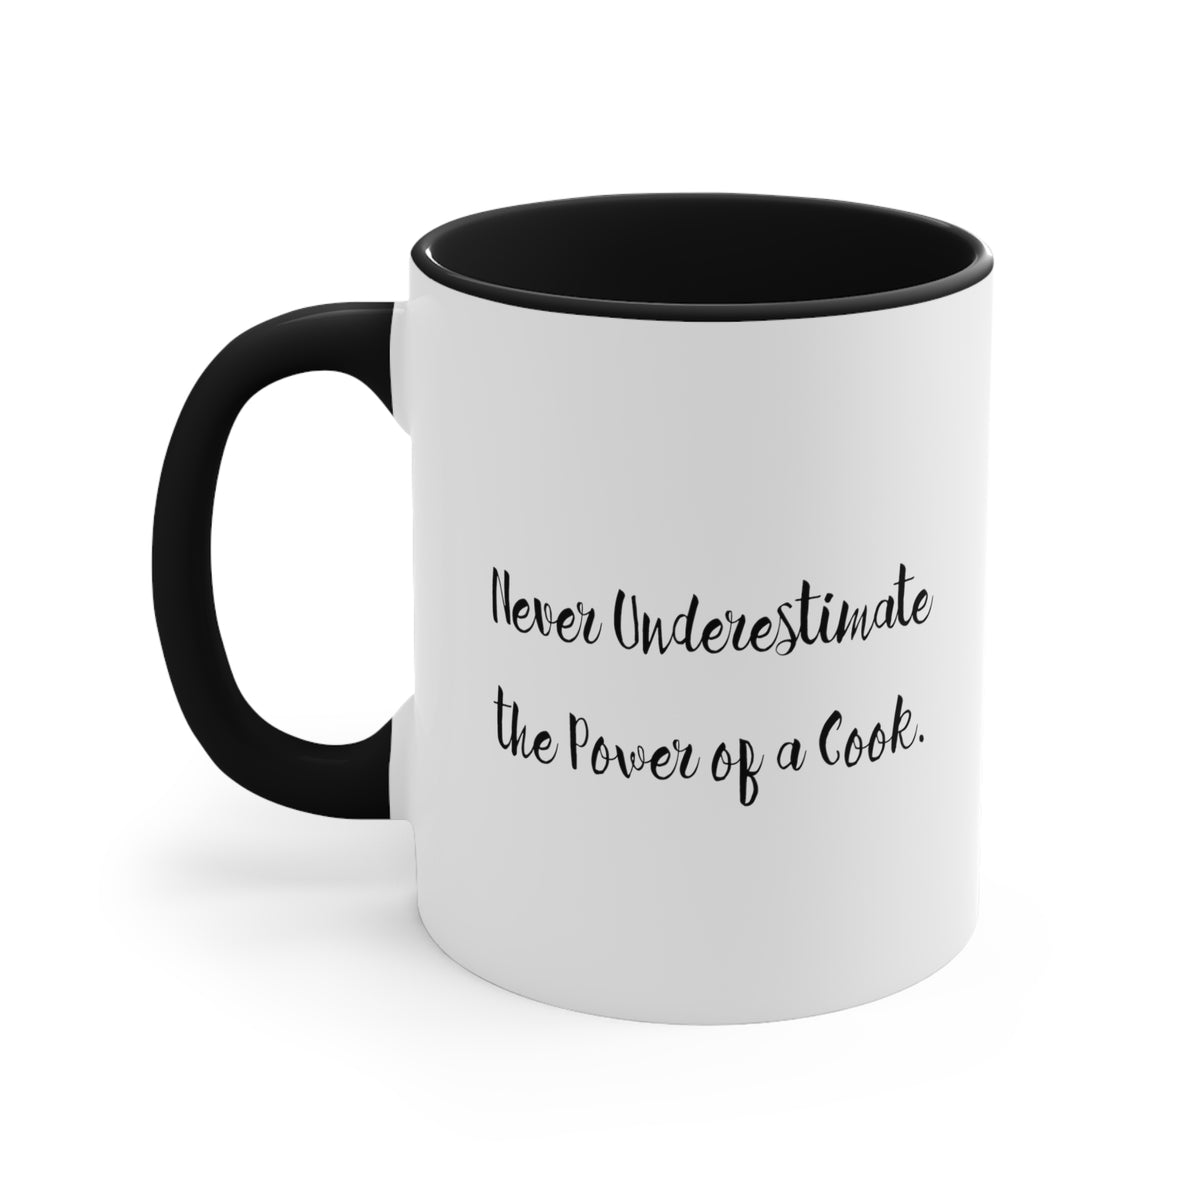 Cool Cook Two Tone 11oz Mug, Never Underestimate the Power of a Cook, Fancy Gifts for Coworkers from Friends, Birthday Gifts, Cooking gifts, Gifts for cooks, Kitchen gifts, Gift ideas for cooks